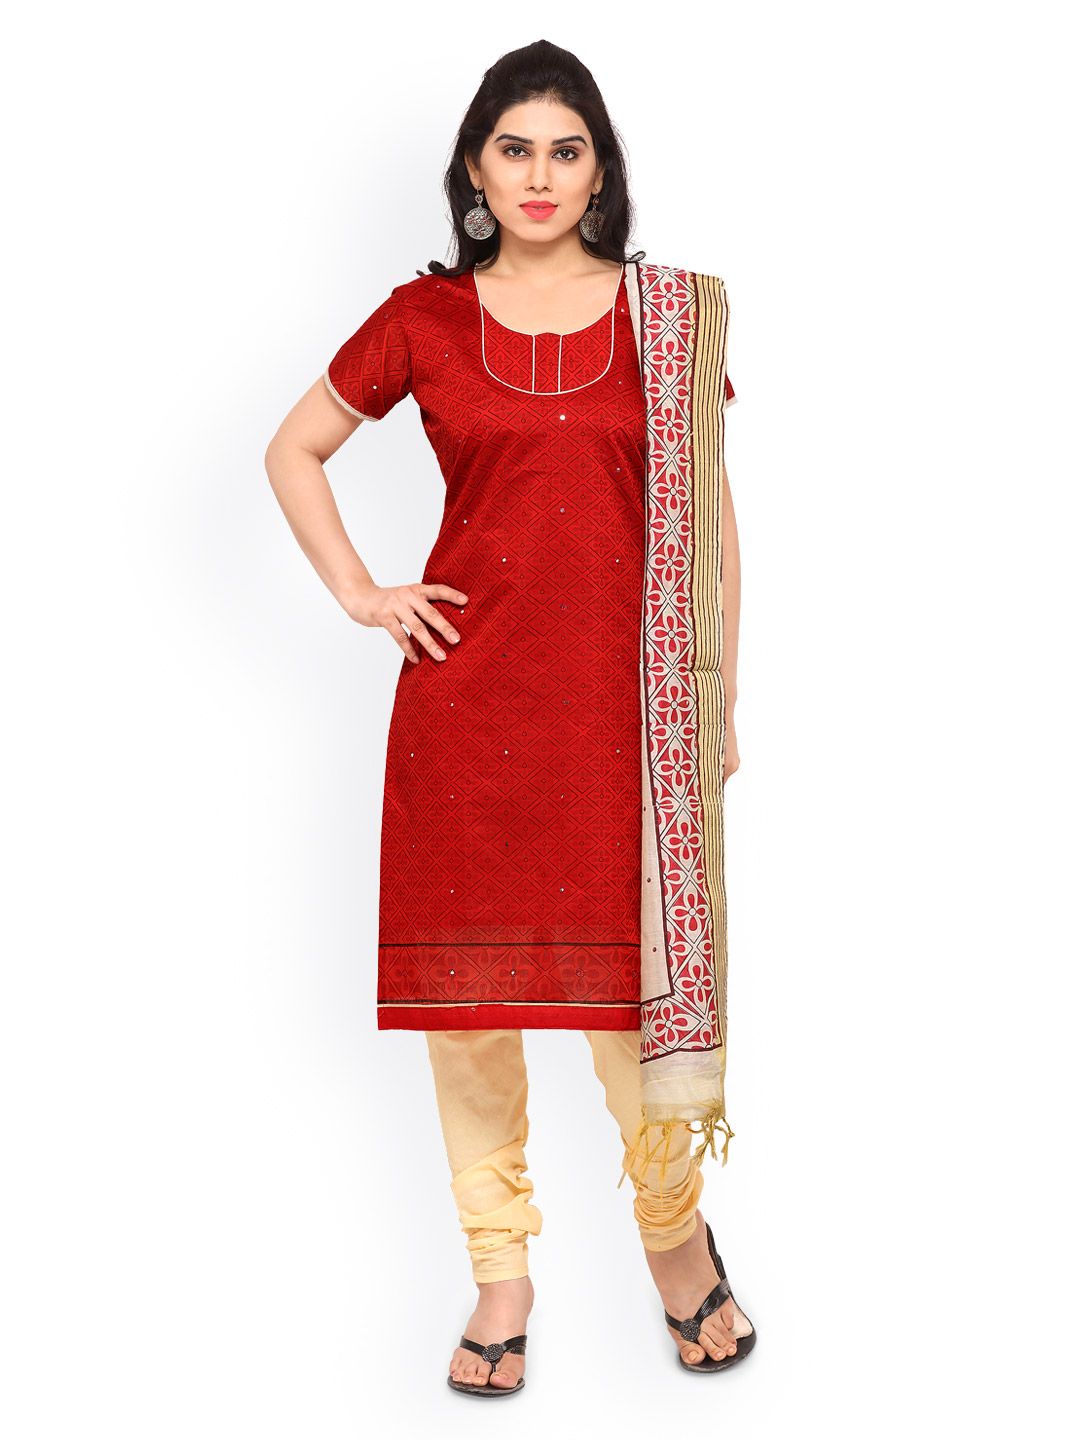 Saree mall Red & Beige Chanderi Cotton Blend Unstitched Dress Material Price in India